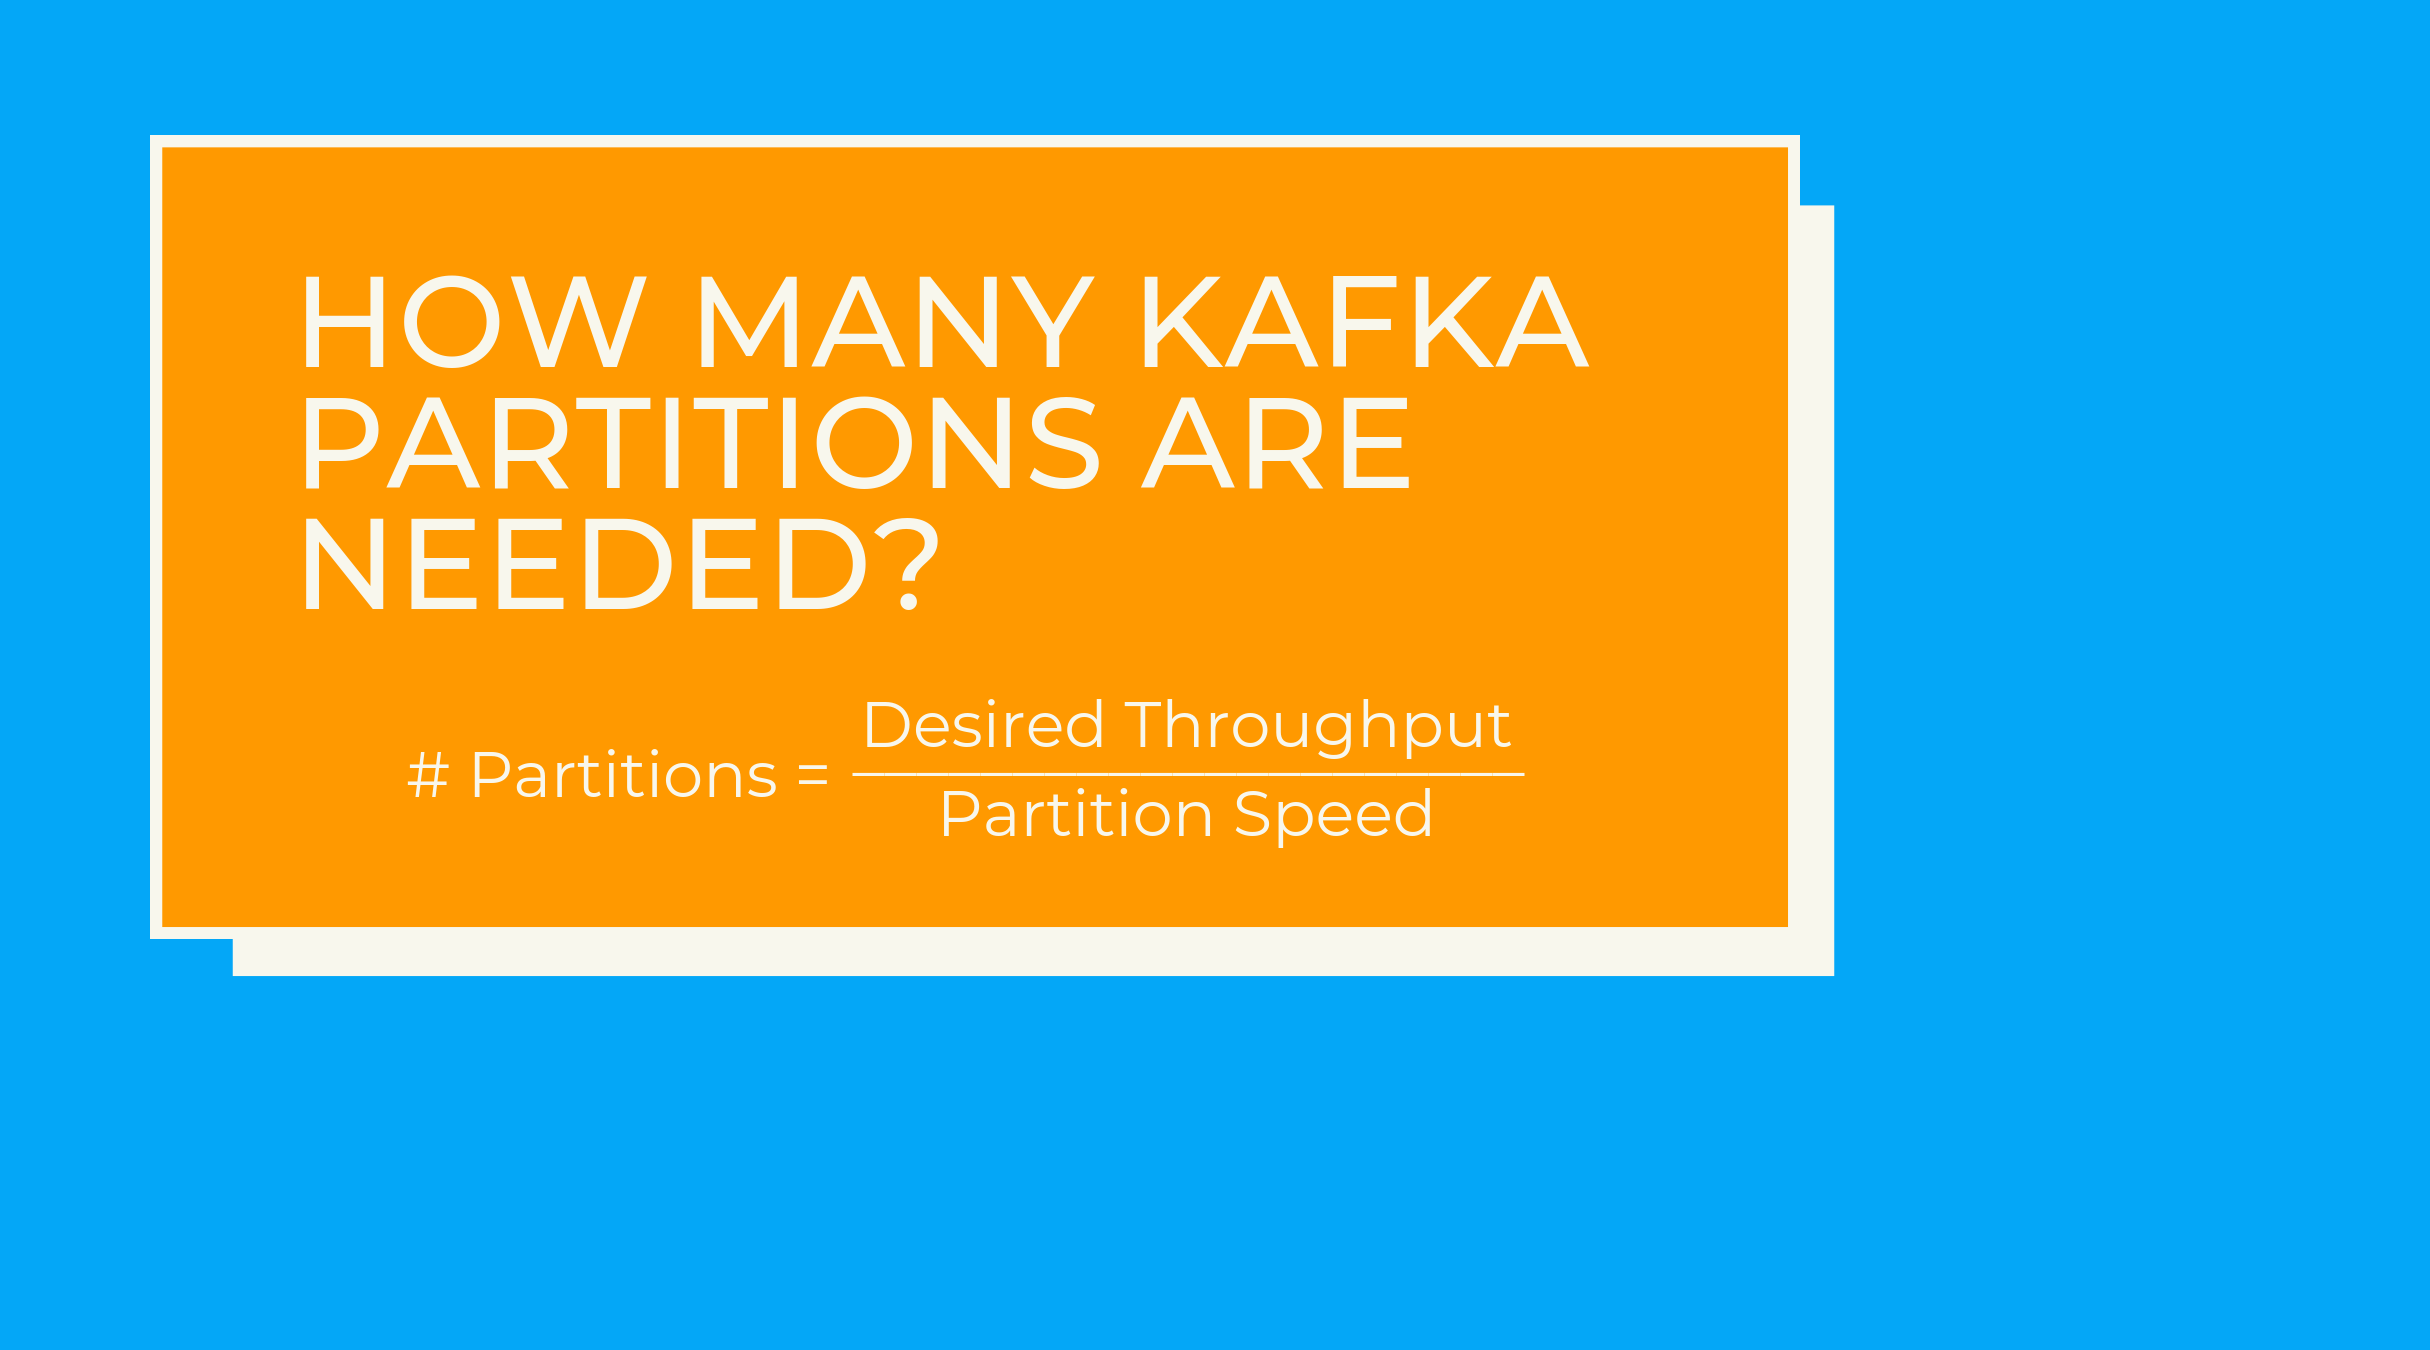 The image reads, "How many Kafka partitions are needed?" and below is displayed the equation for determining the number of partitions.